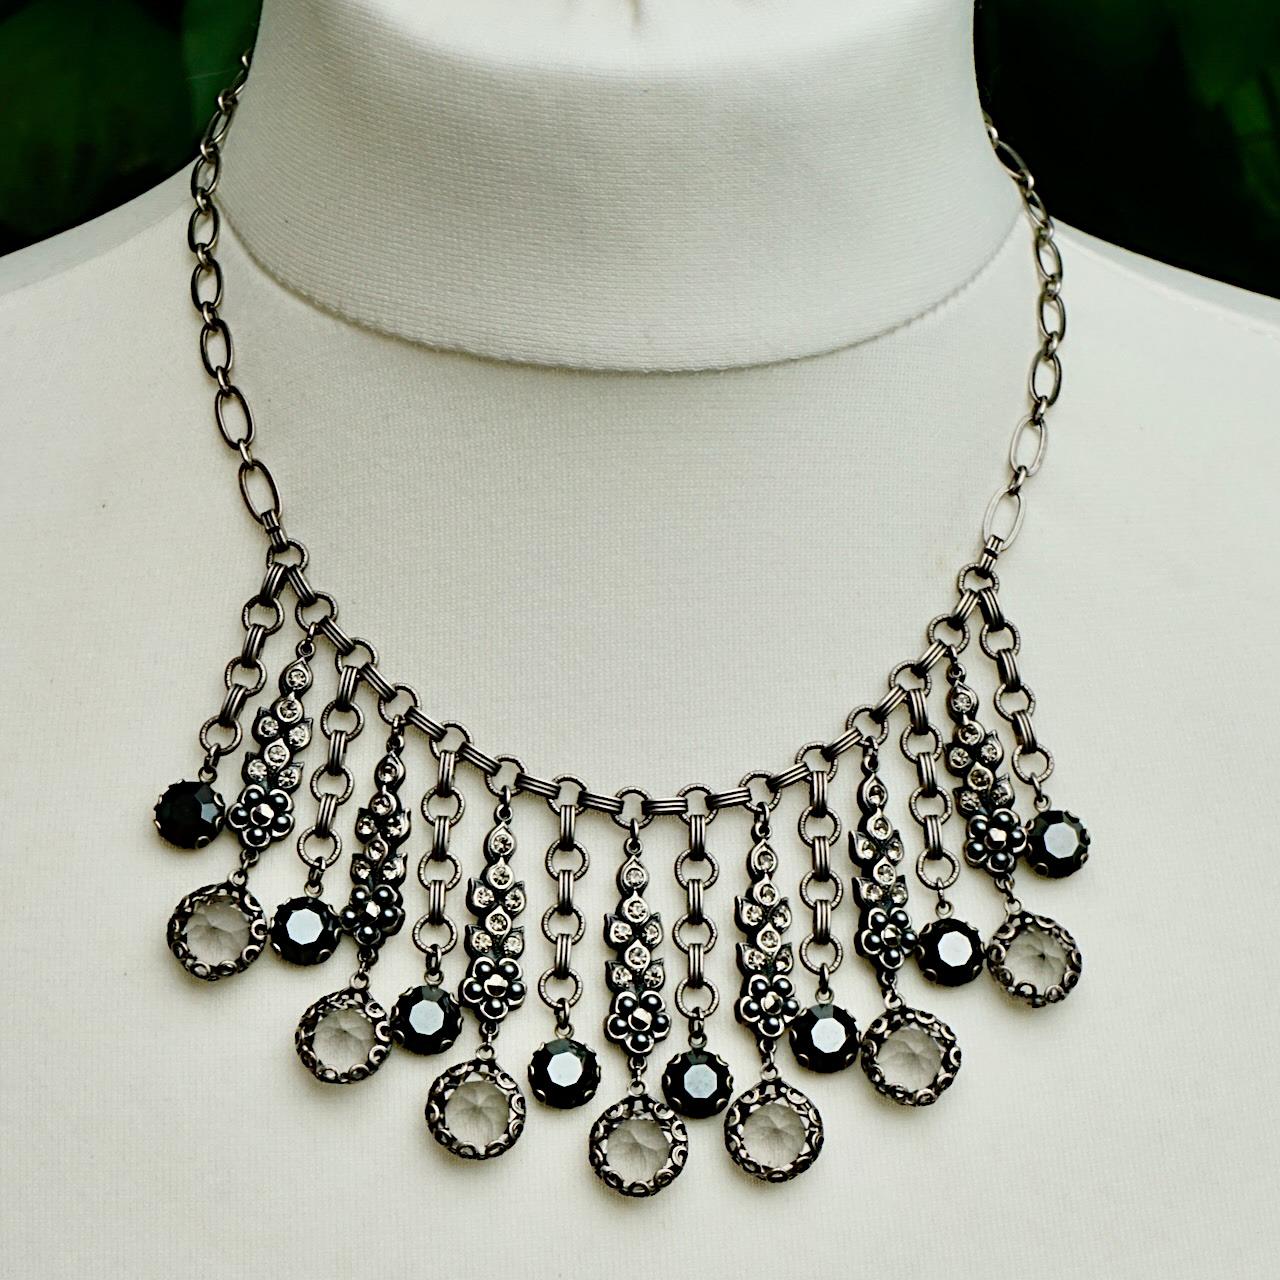 
Fabulous Askew London detailed antiqued silver tone necklace, featuring fifteen drops set with marcasites, grey pearls and rhinestones. It has a hook clasp set with rhinestones. Measuring necklace length 47.8 cm / 18.8 inches, and the longest drop